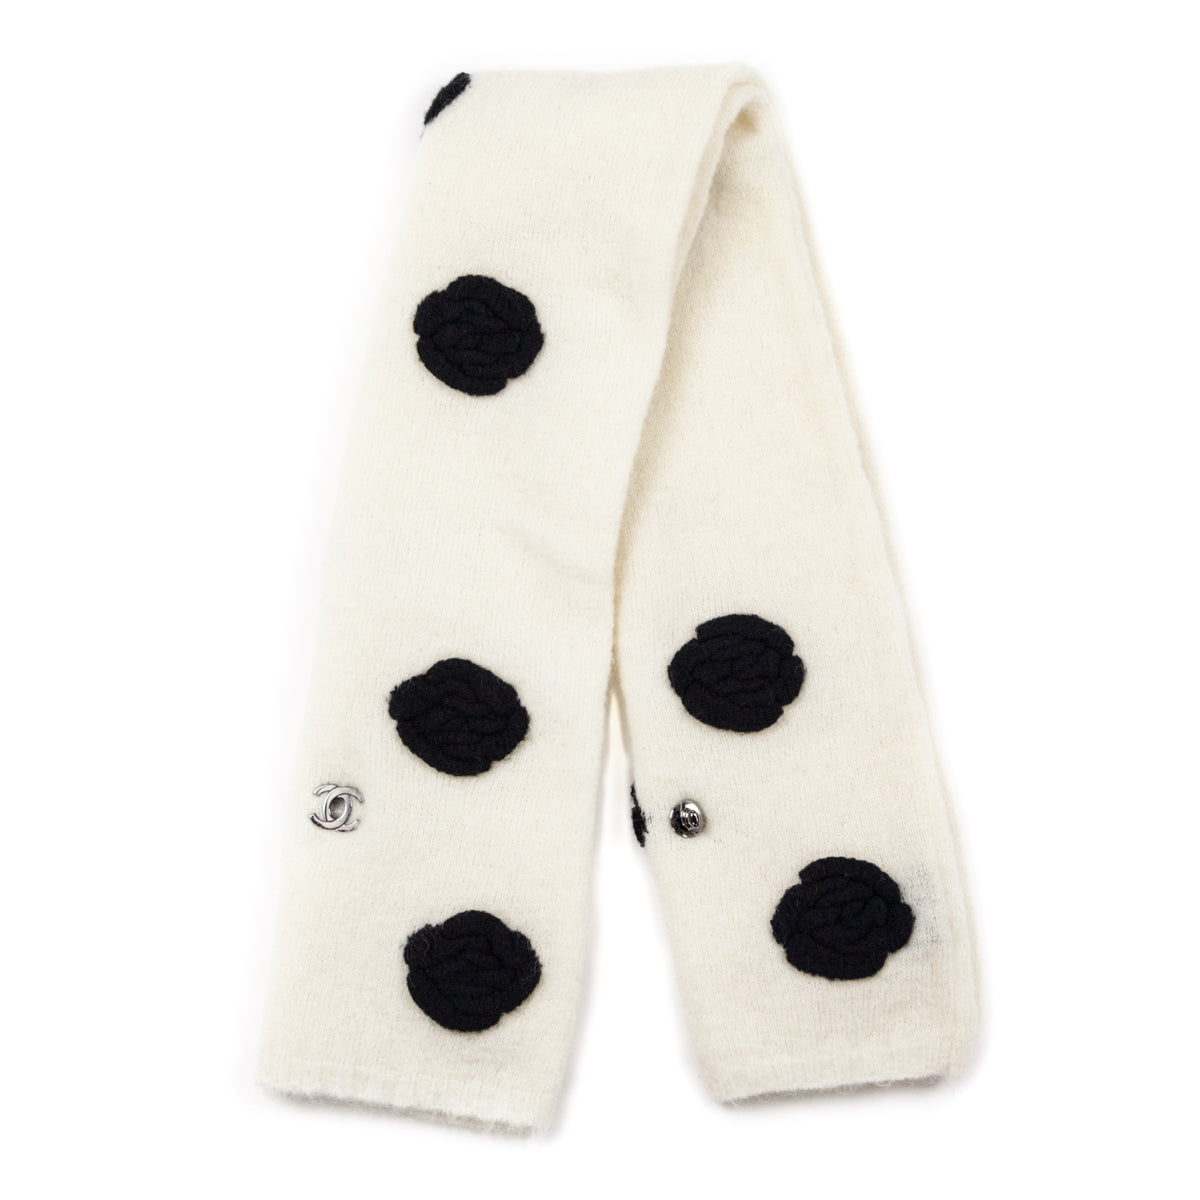 Chanel Ivory & Black Mohair Camellia Scarf - Chanel Accessory